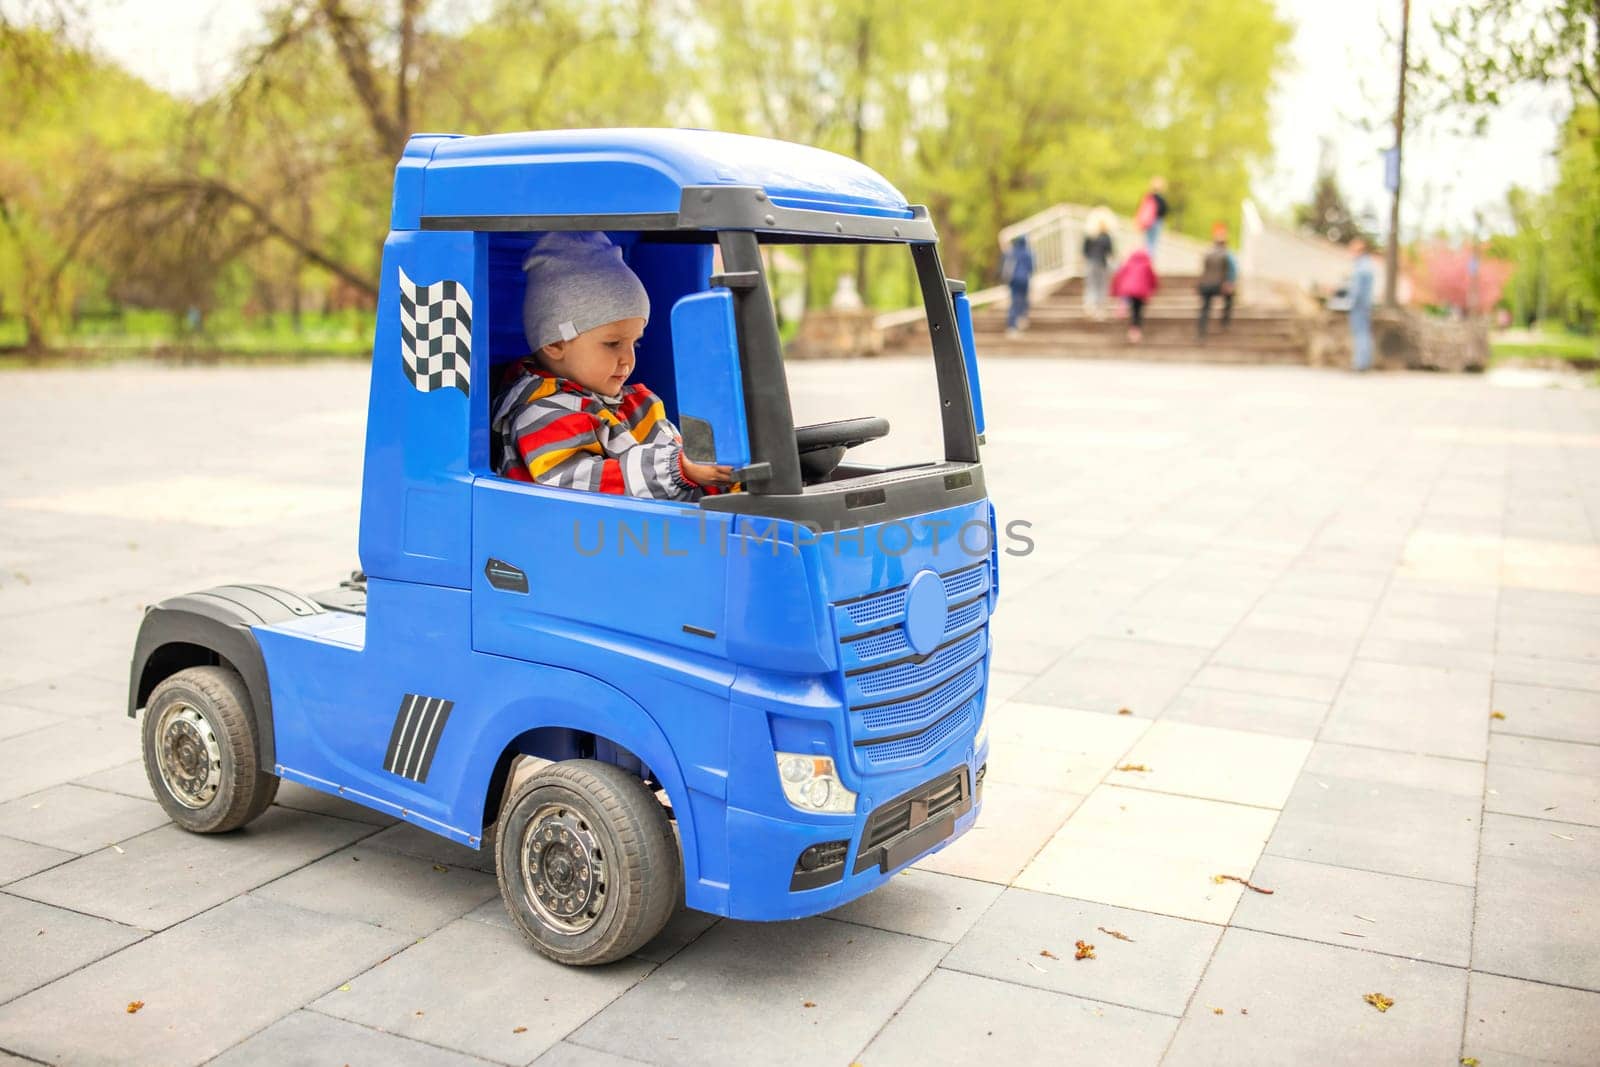 Cute little boy driving electric toy car outdoors in park. by andreyz